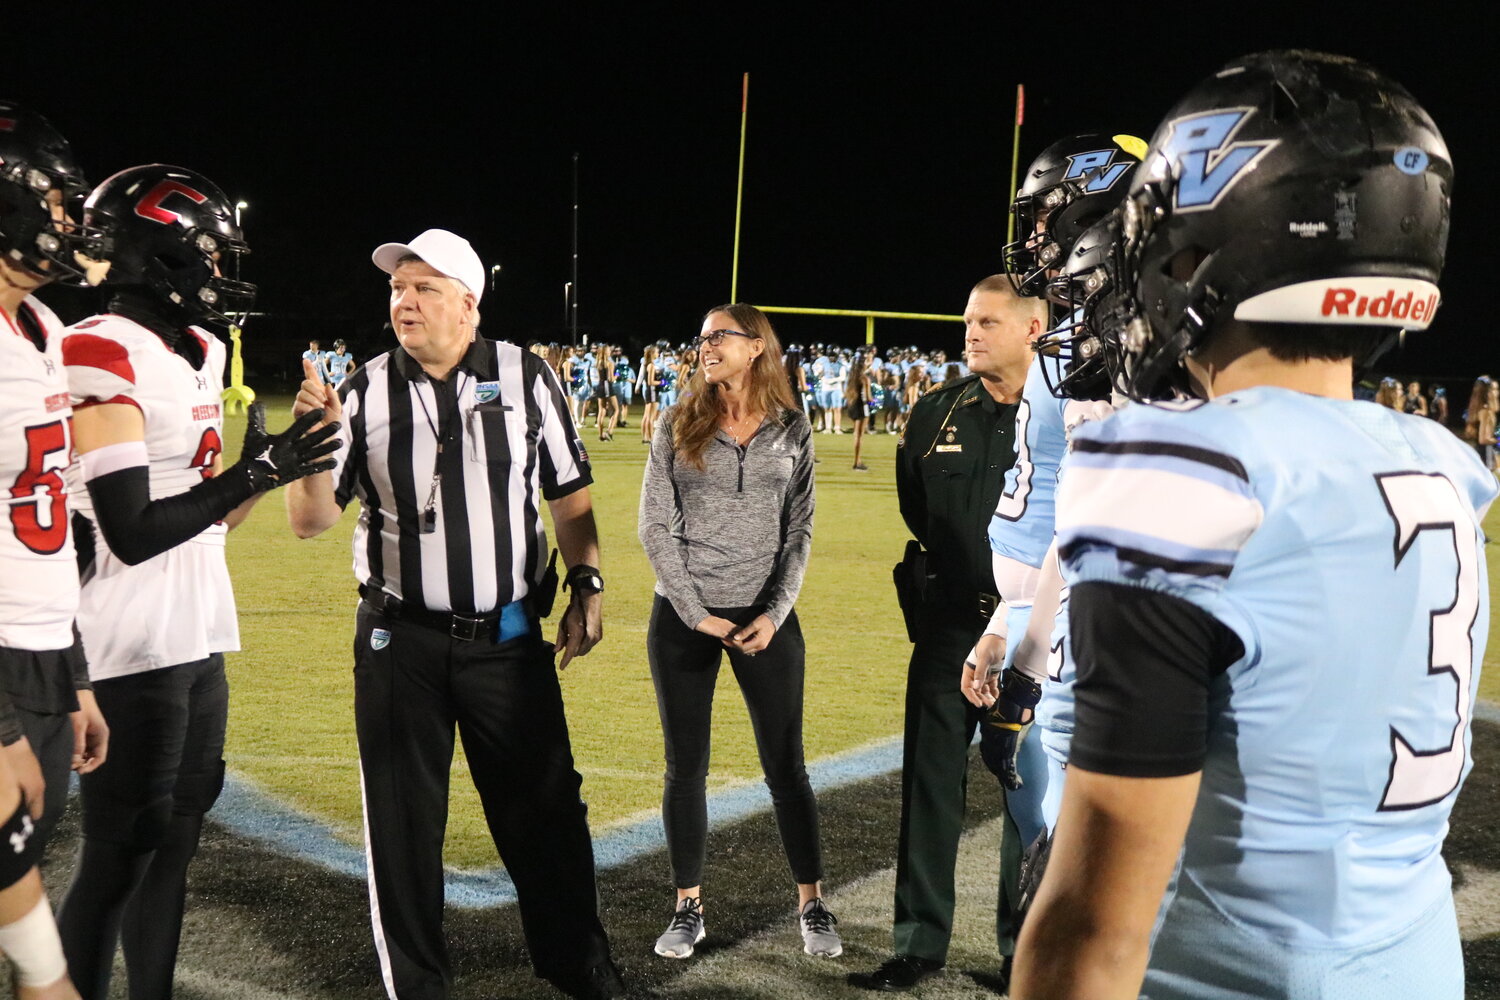 St. Johns County Sheriff Robert Hardwick and his wife Kendell were on hand for the coin toss.